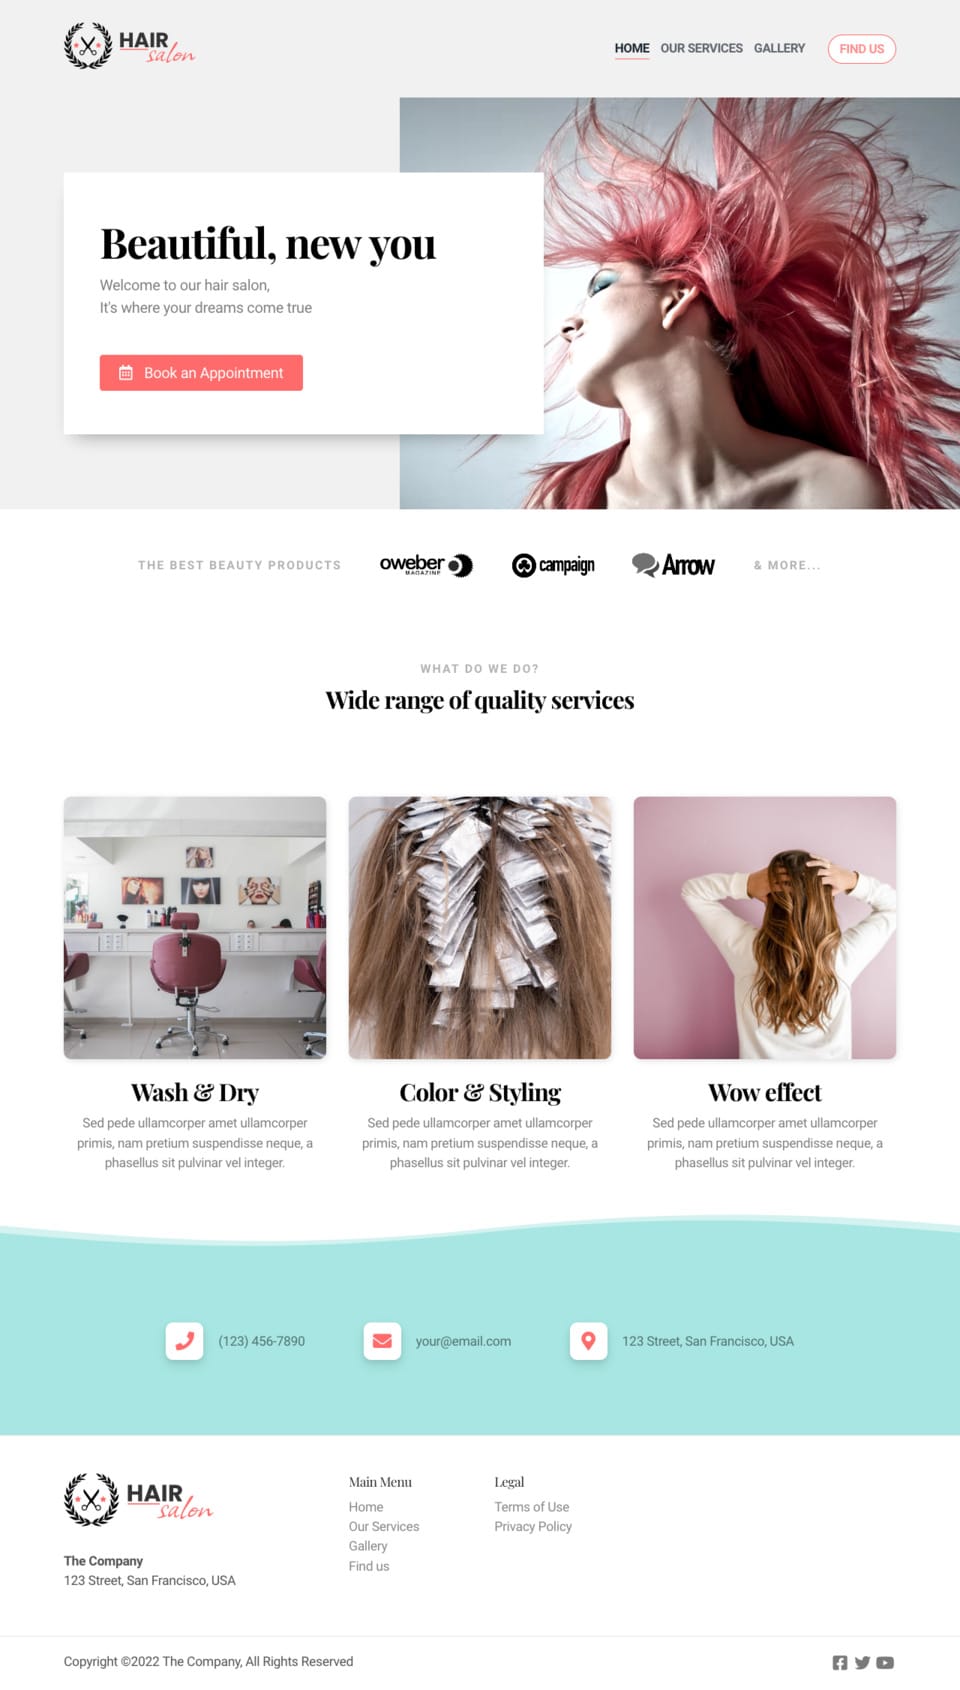 Hair Salon Website Template - Ideal for hair salons, hair dressers, barbers, beauticians, and businesses in the beauty industry.